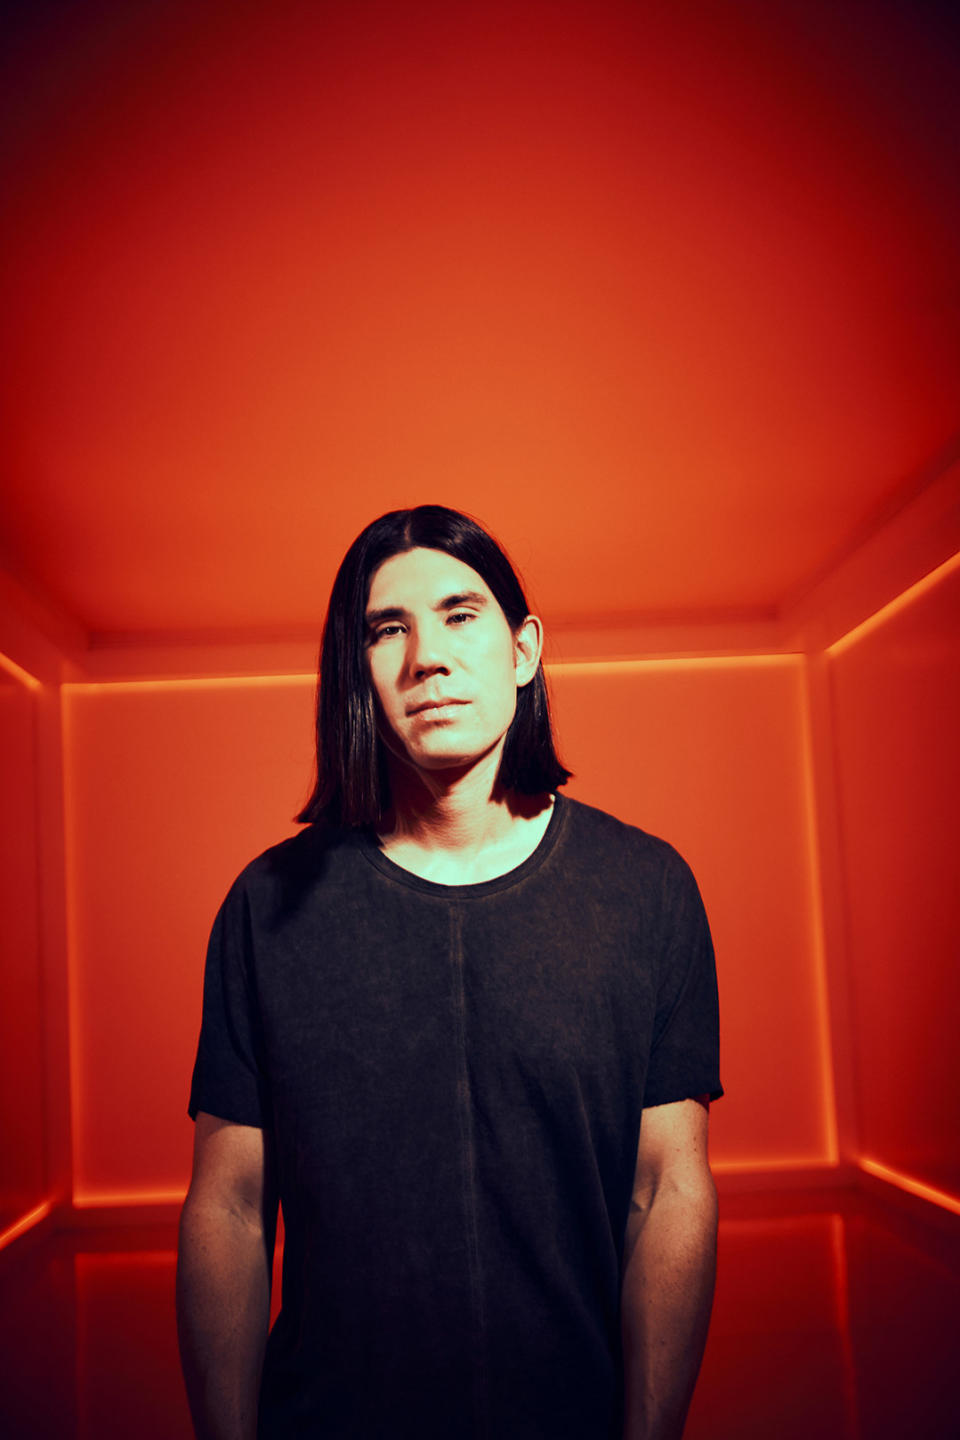 Gryffin posing in a red room with black vignette